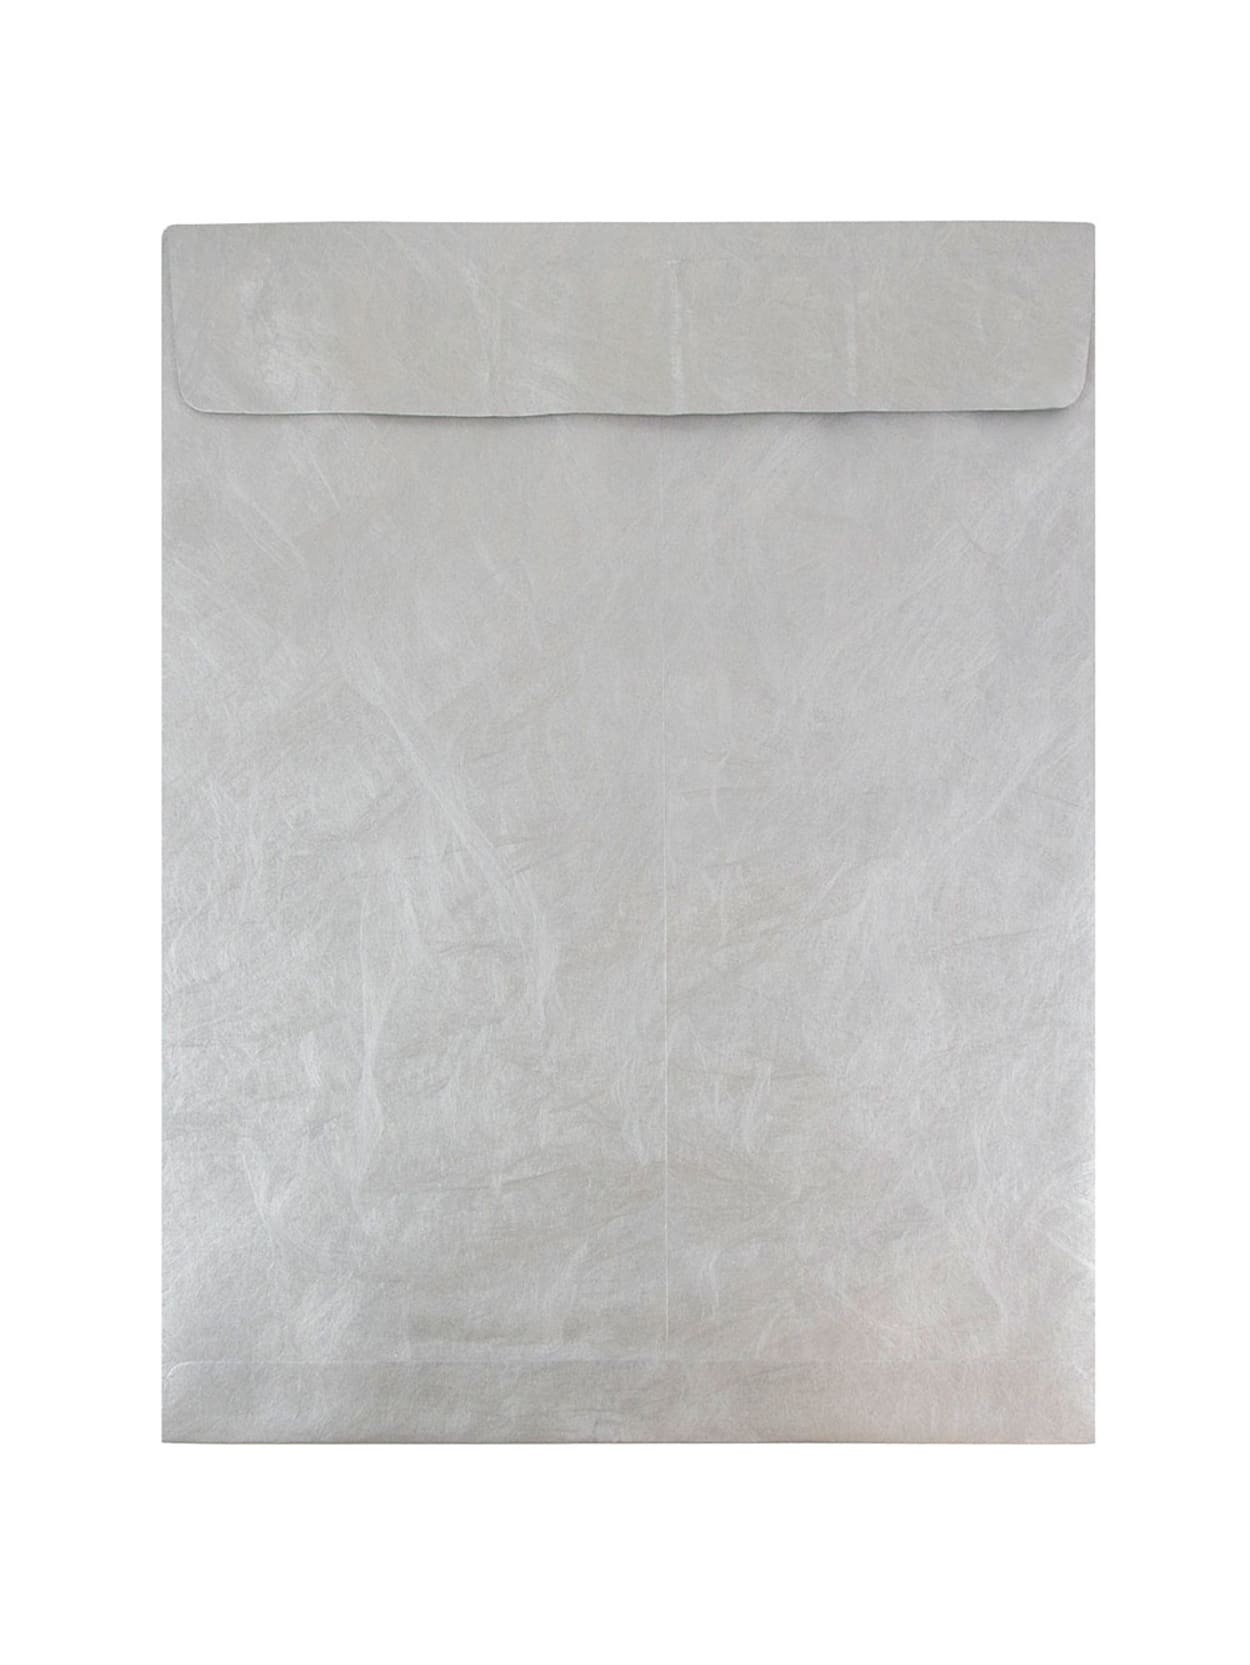 25 White Tyvek Sheets-10 1//2 X 11,SUB 14 ALL PURPOSE-tear water resistant Paper